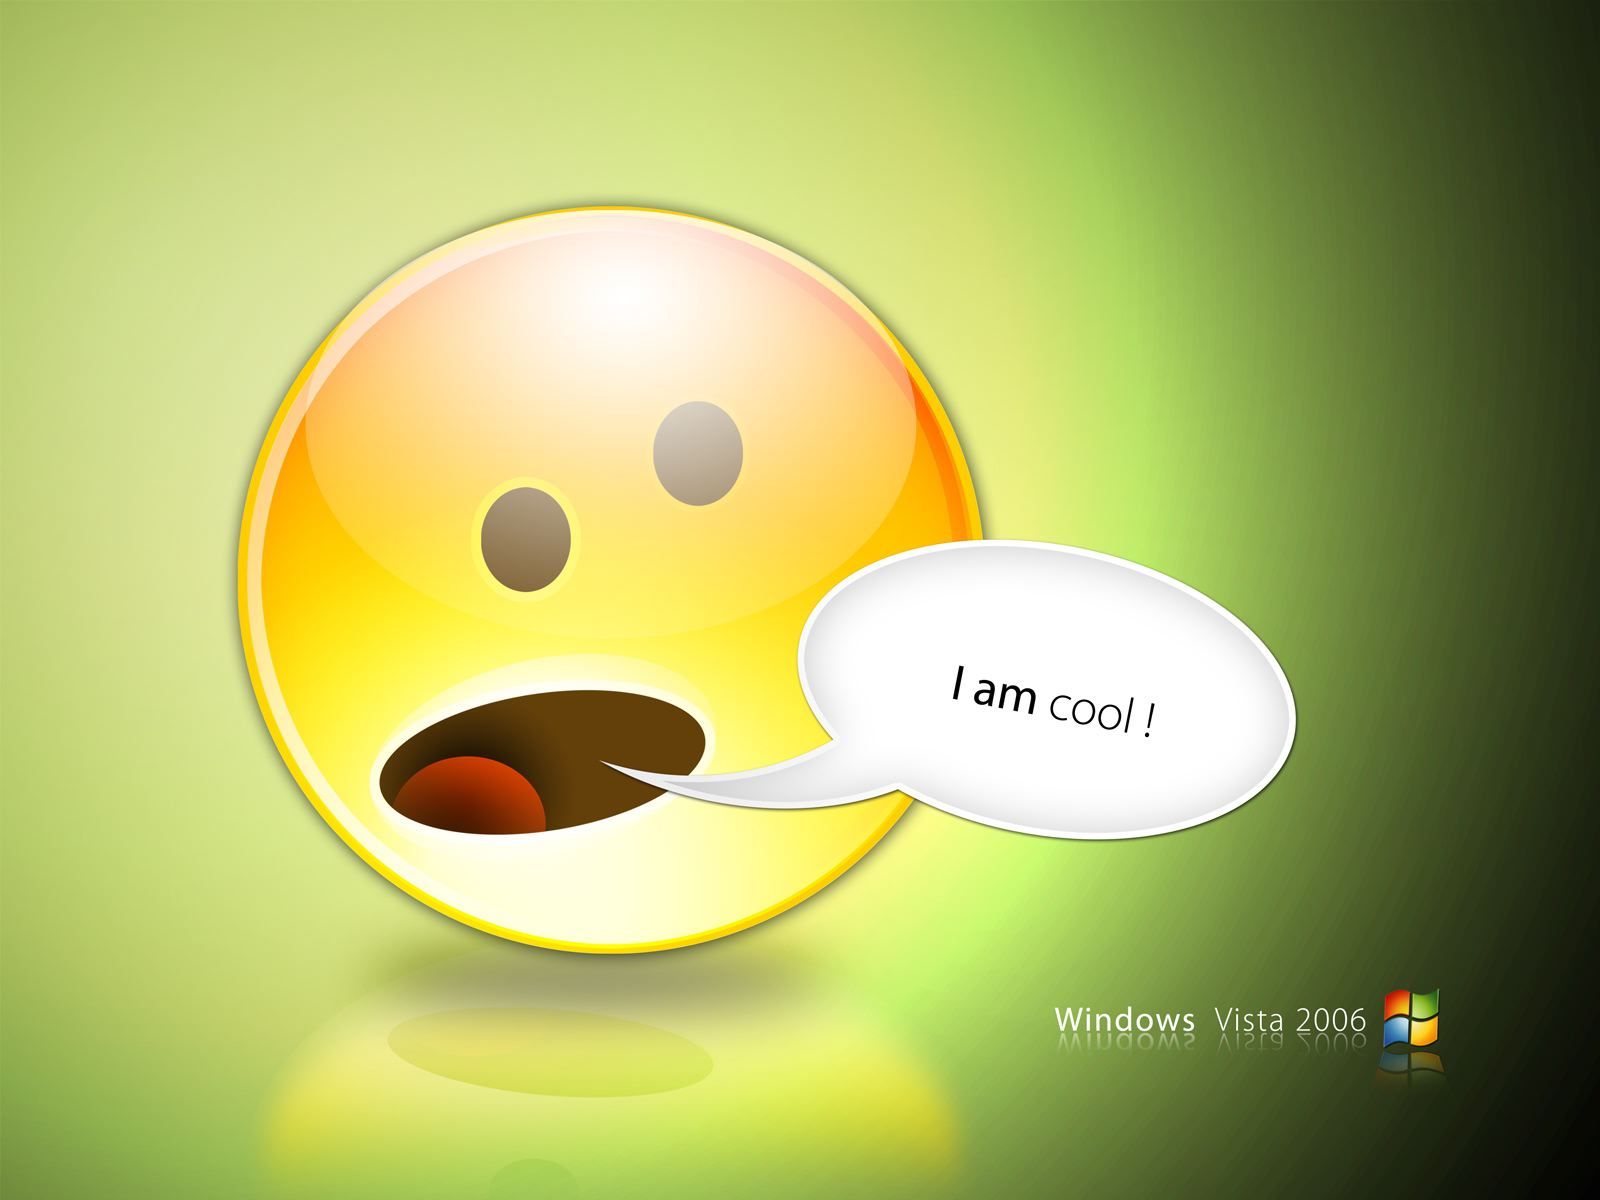 Funny smiley faces backgrounds |Funny & Amazing Images